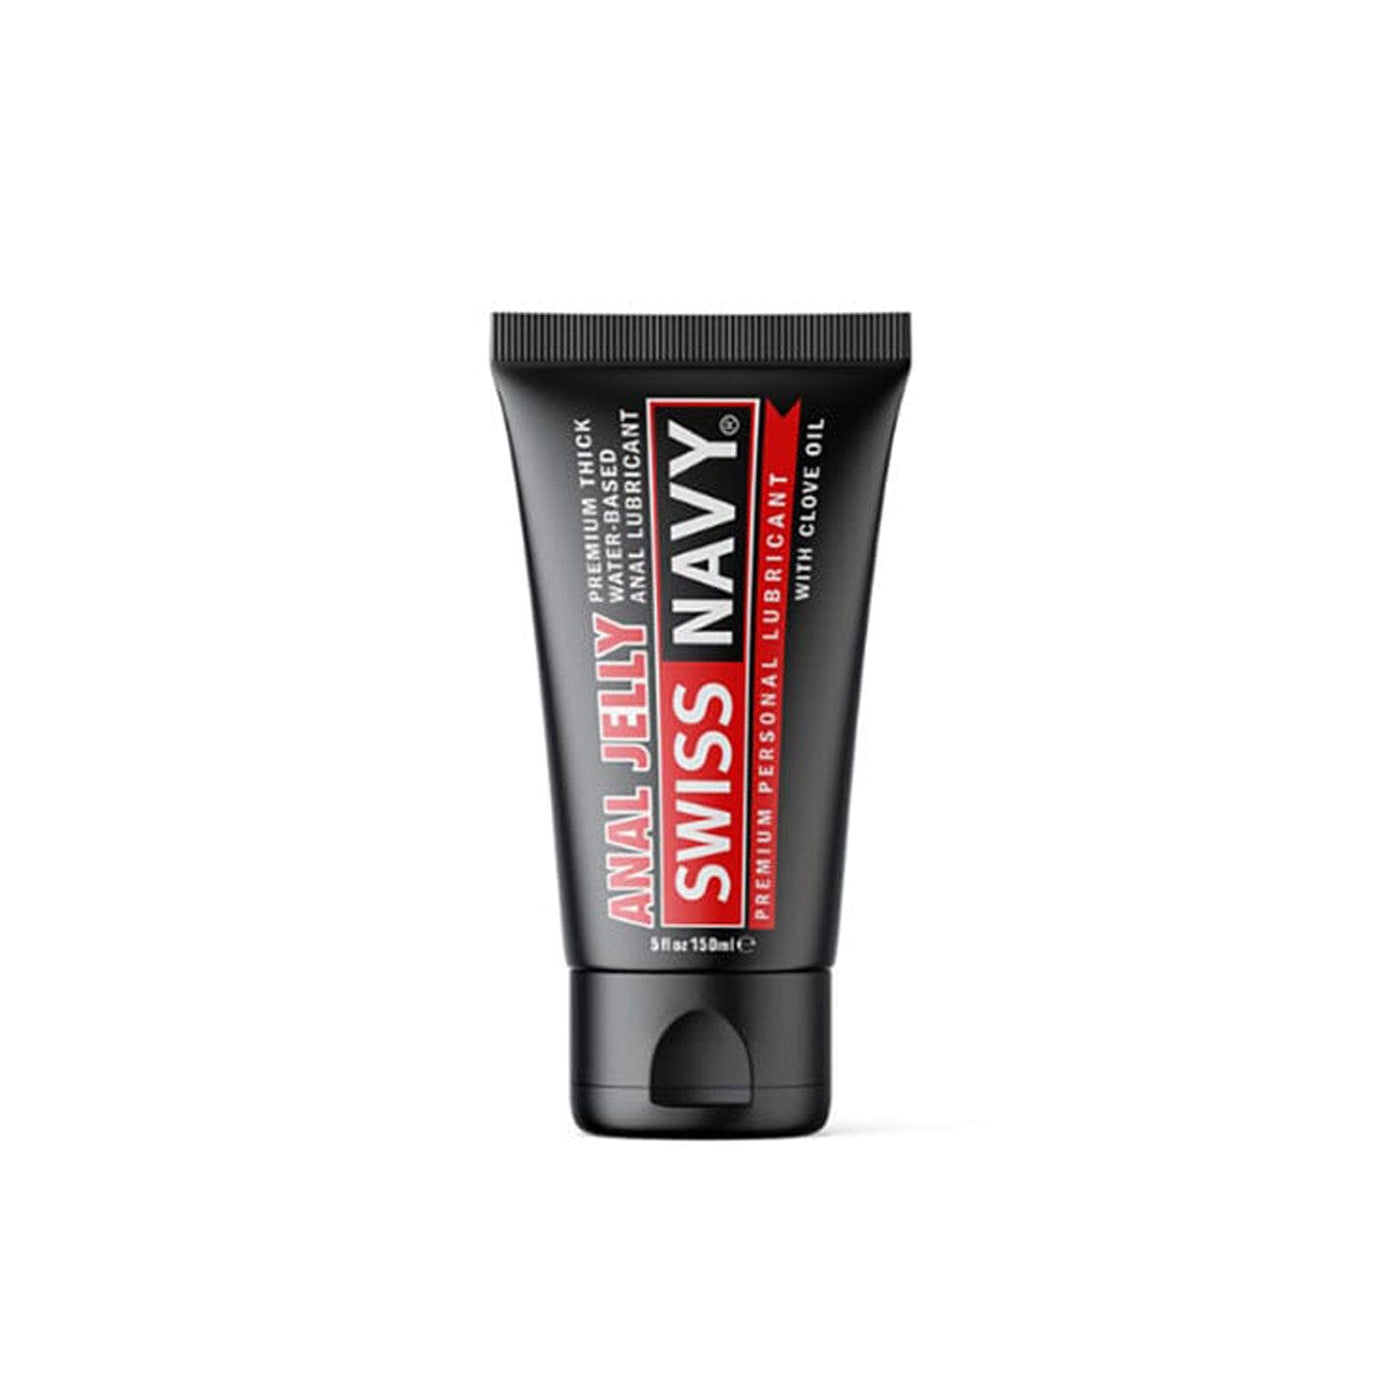 Swiss Navy Thick Anal Jelly Lubricant